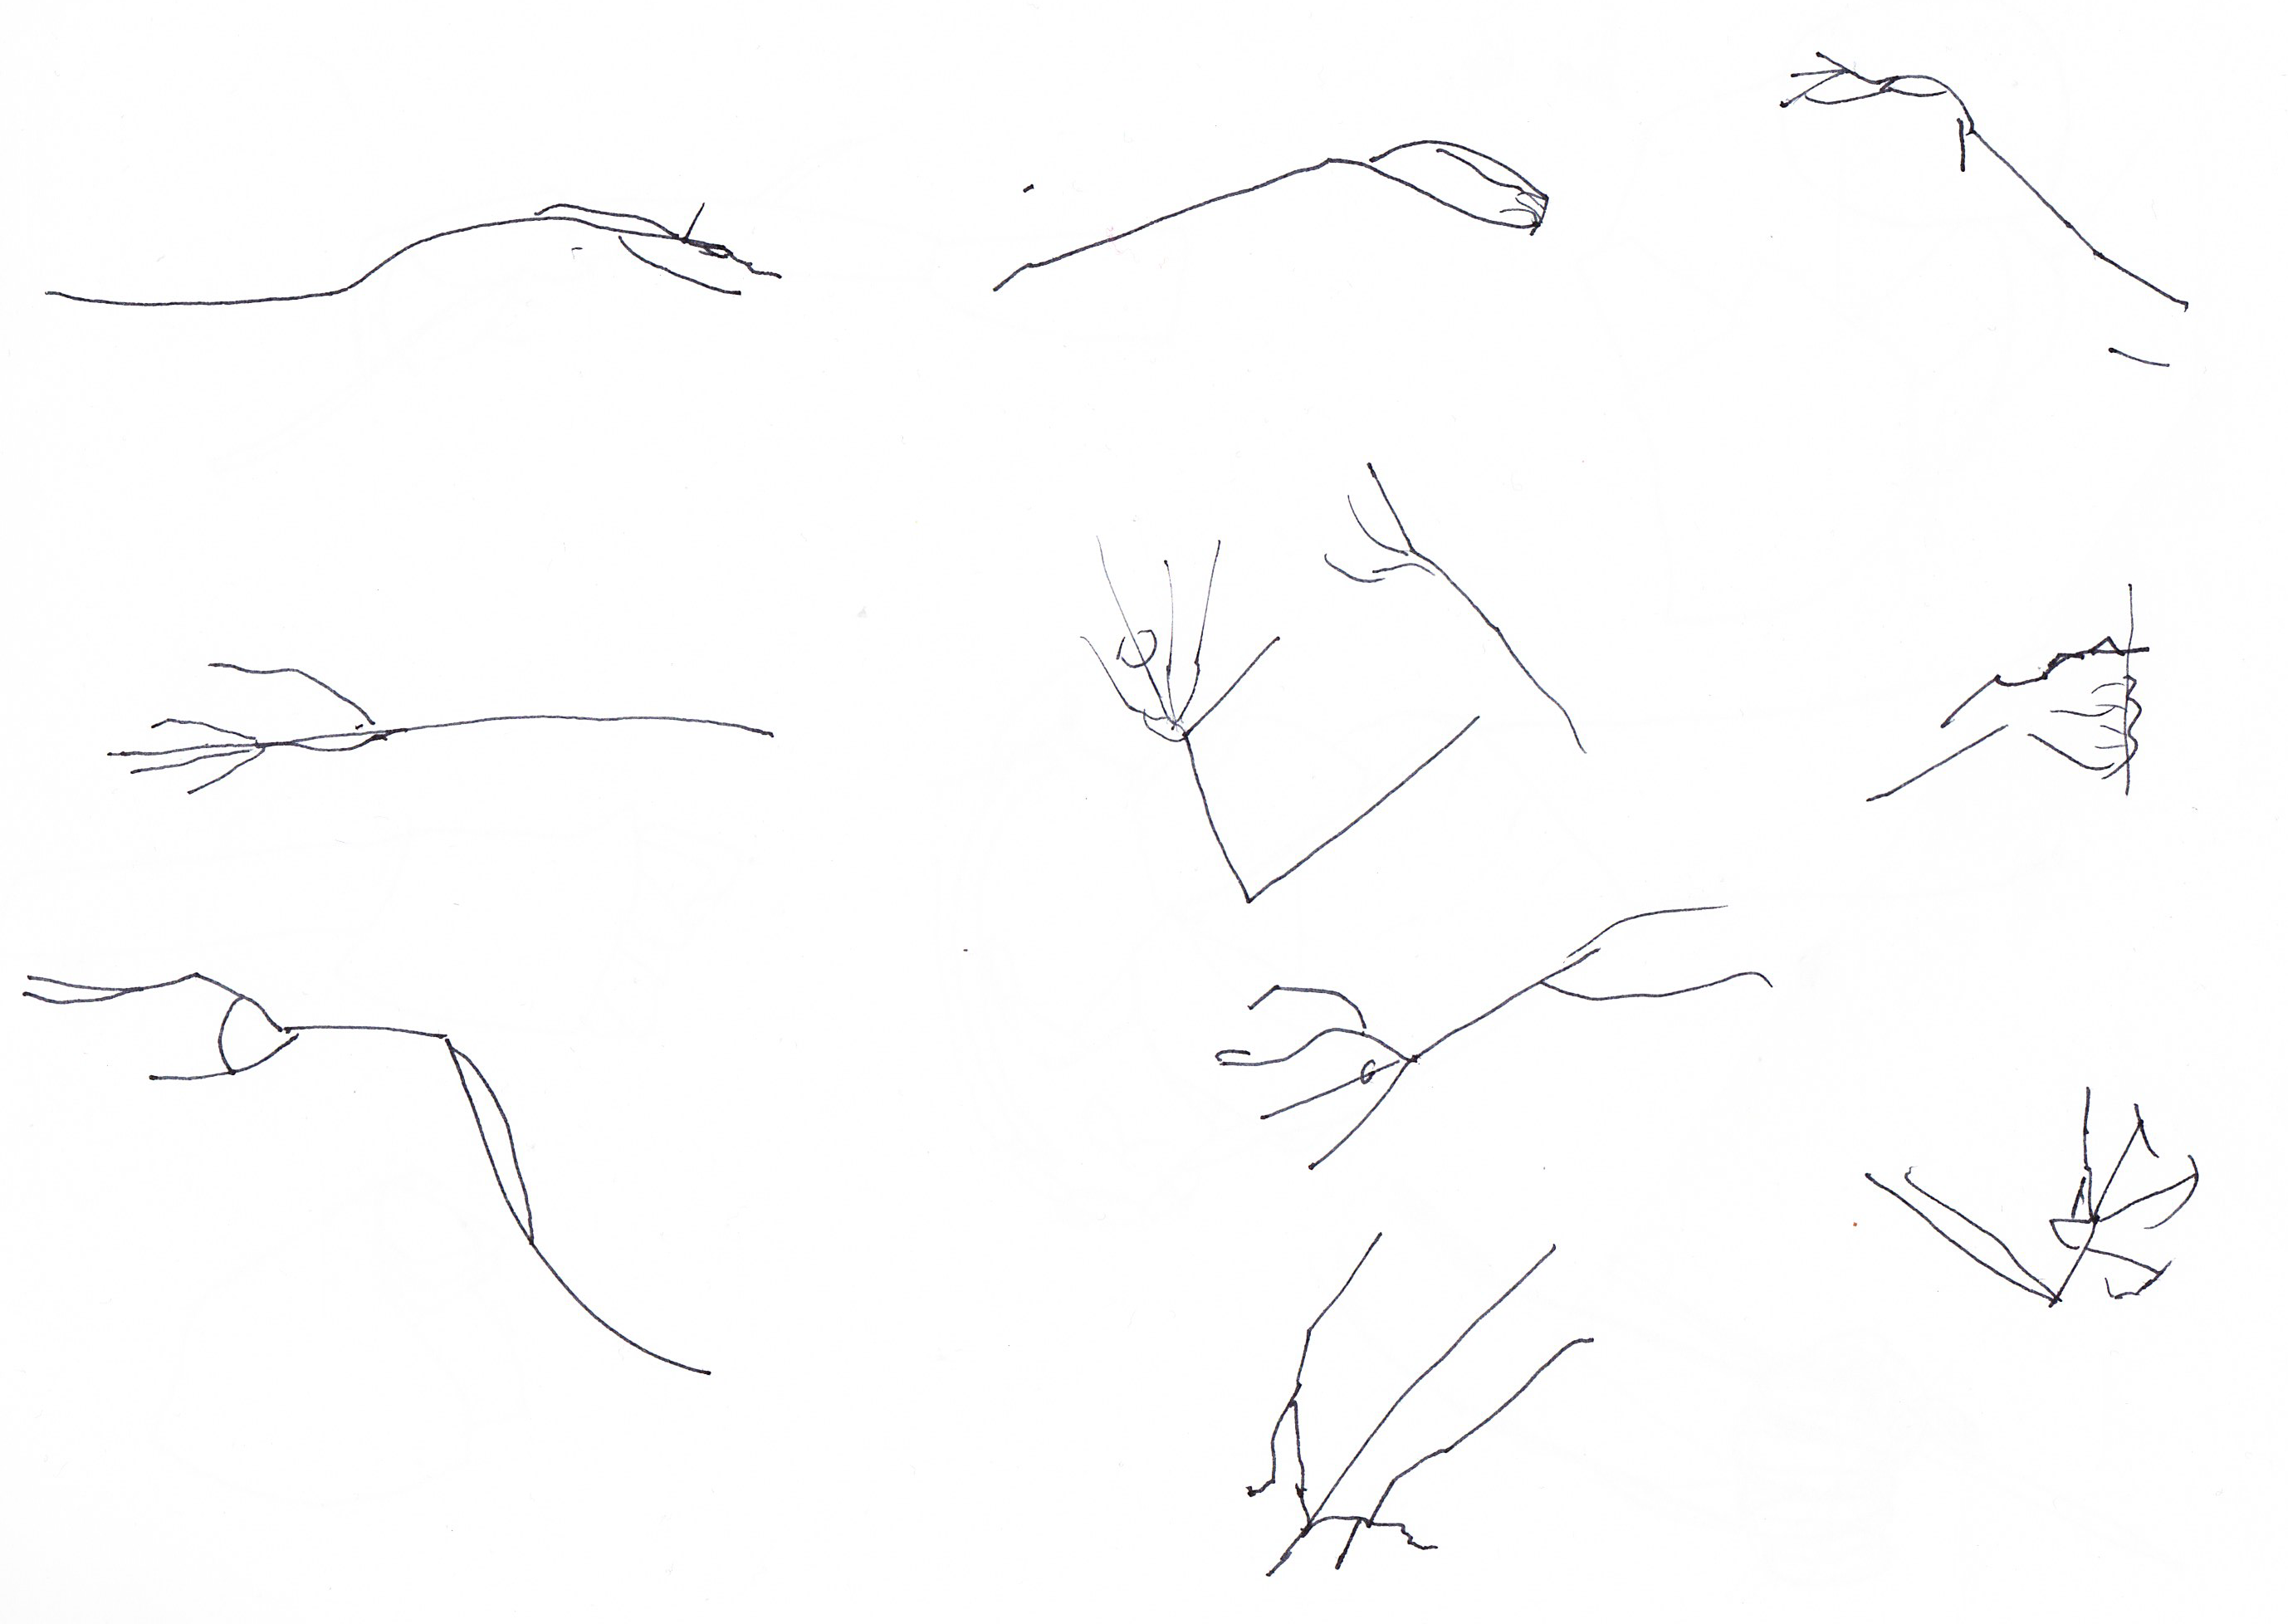 30 Second Hands - Day 313 - Learning to Draw